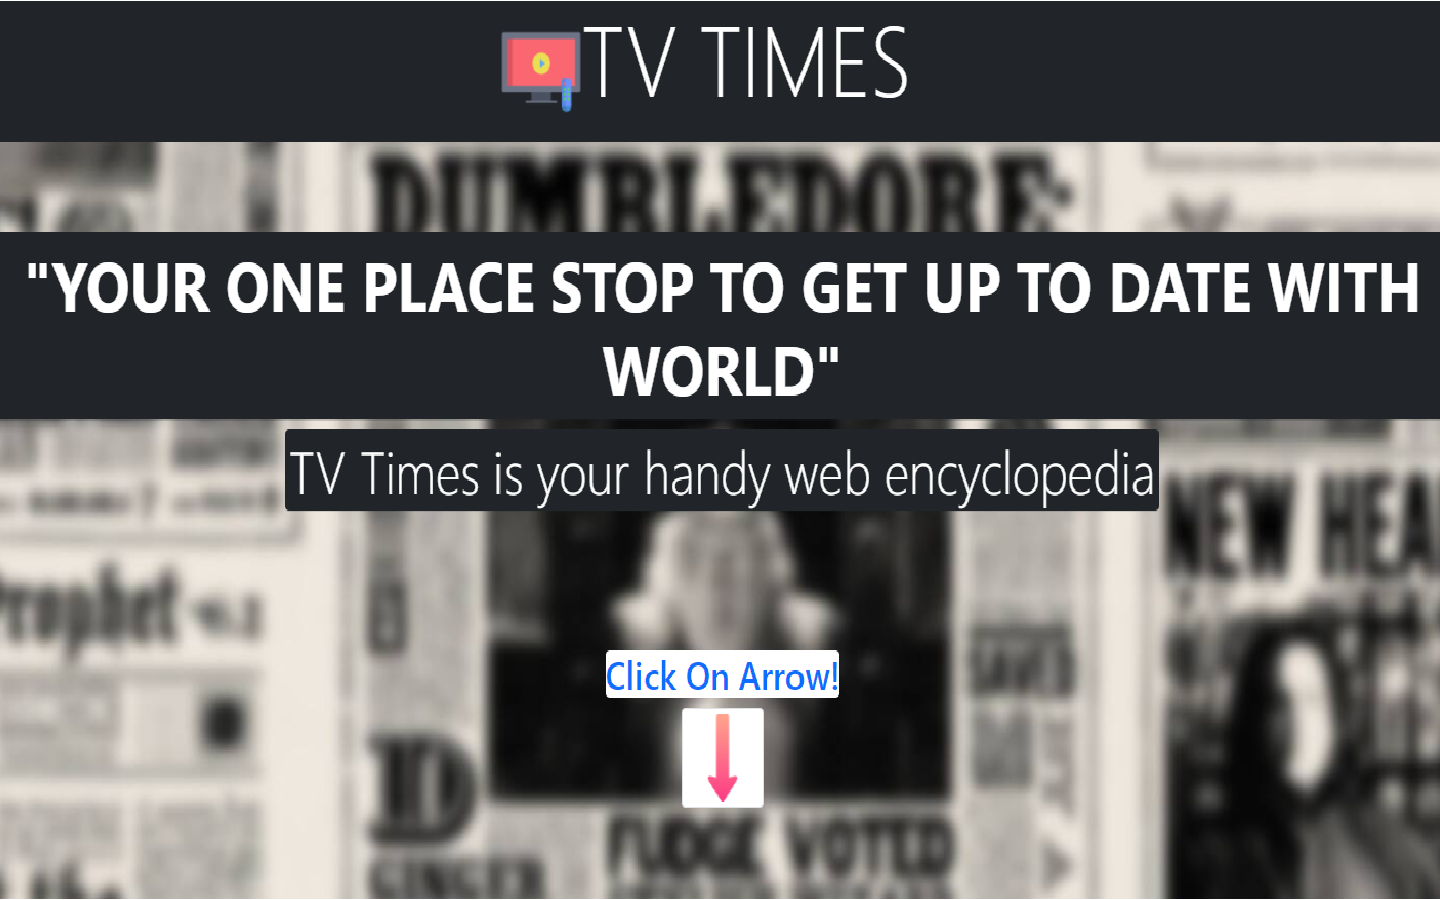 TV-TIMES web page